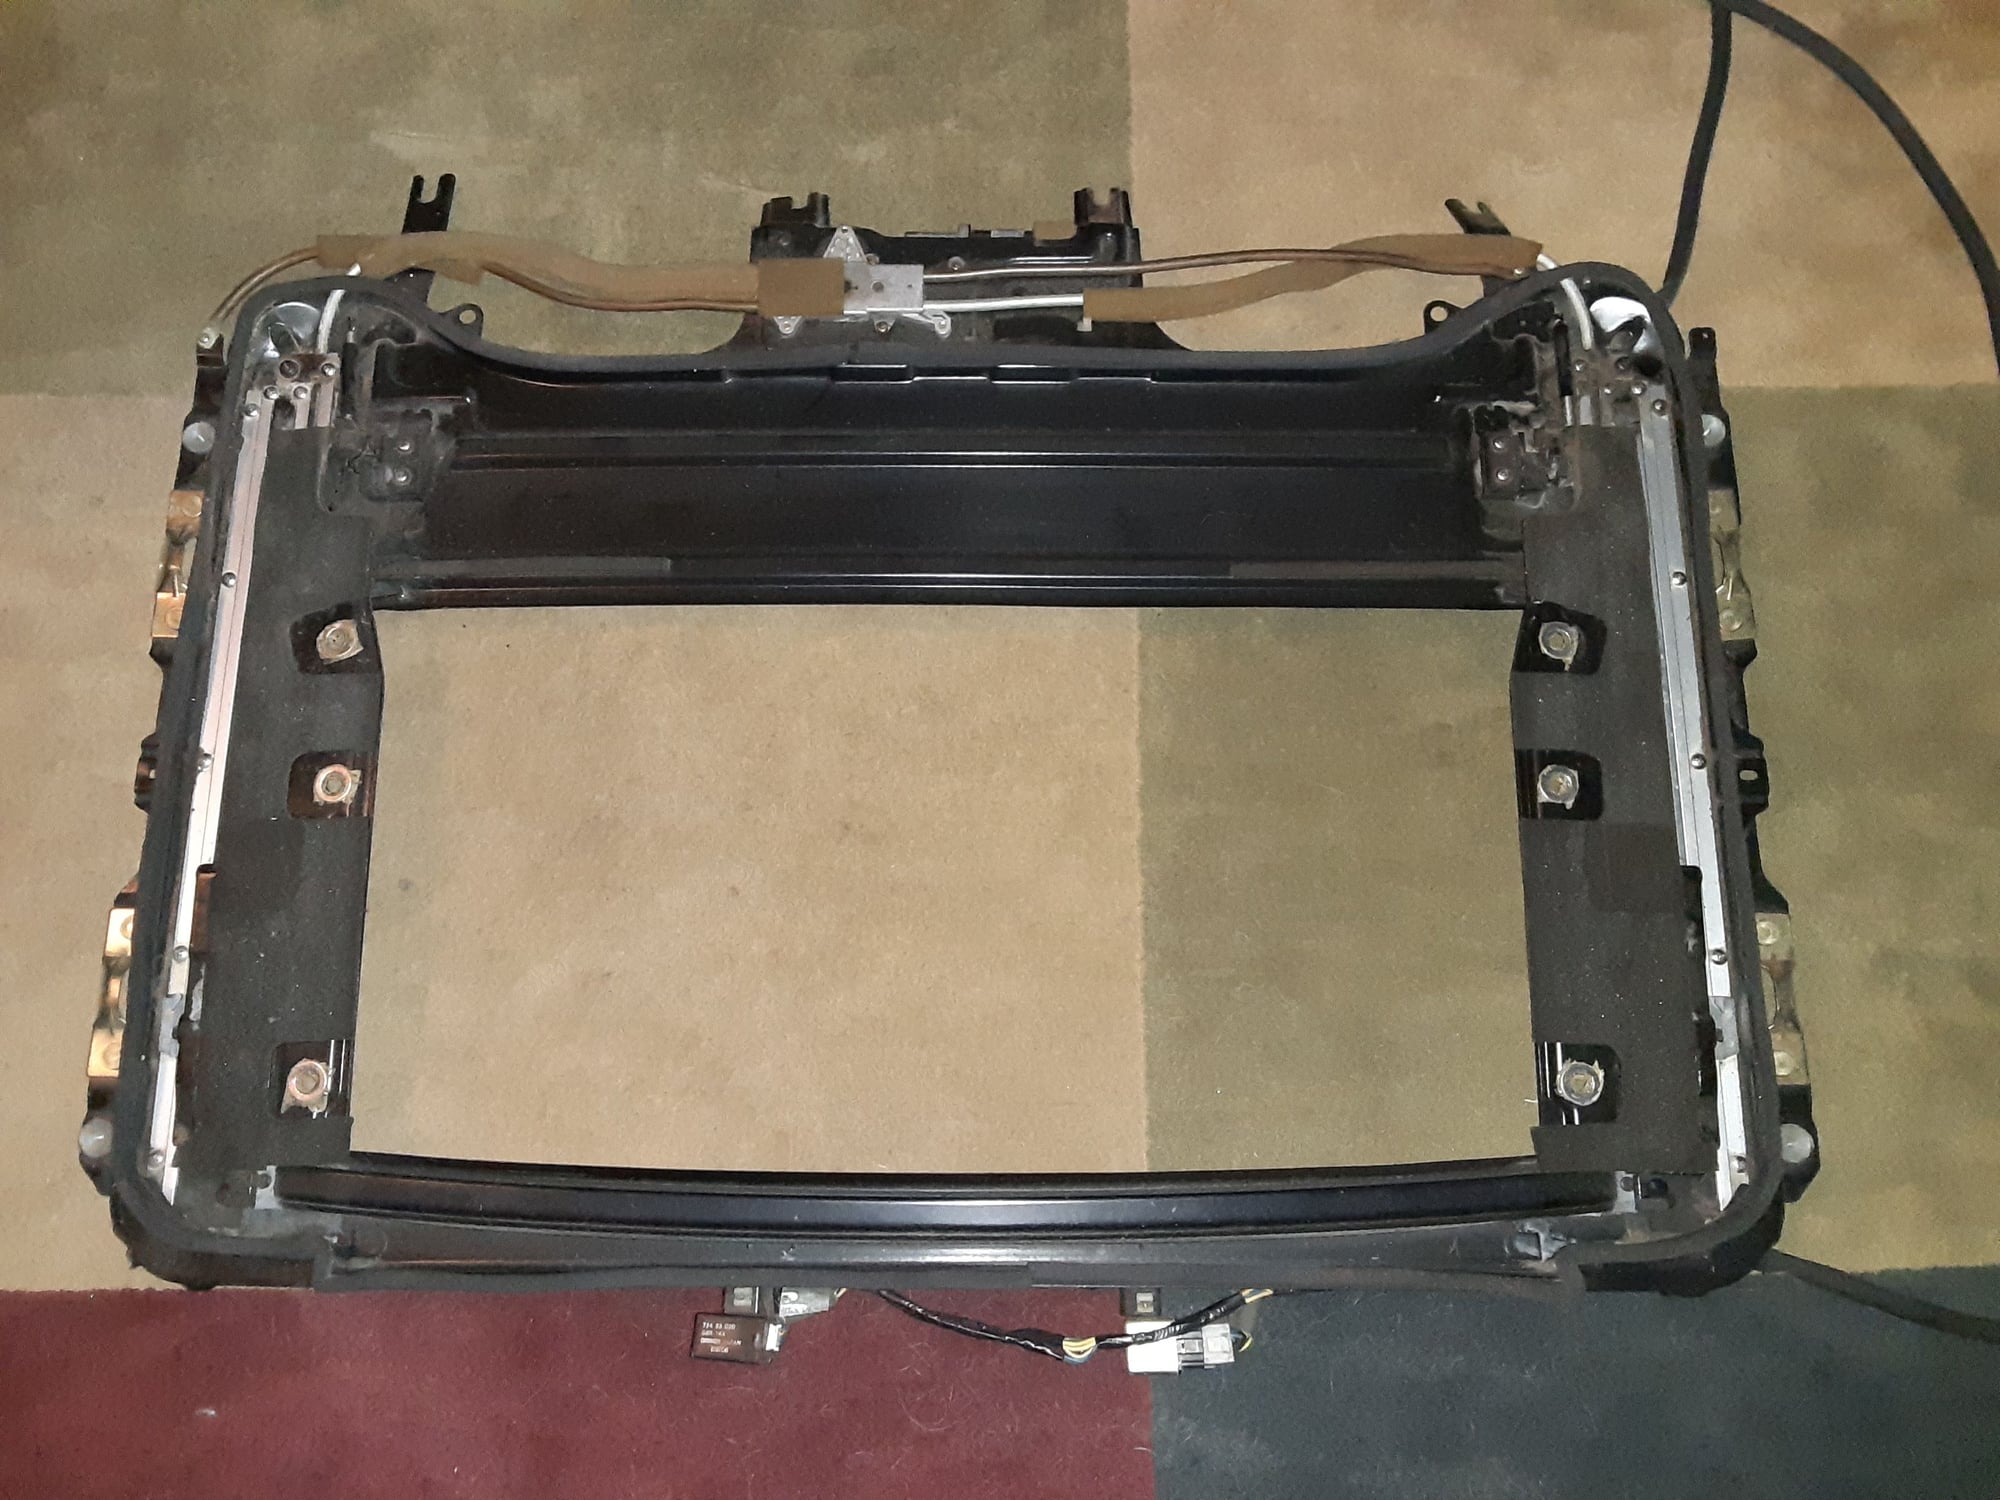 Exterior Body Parts - Complete S5 Sunroof For Sale! - Used - 0  All Models - Spotswood, NJ 08884, United States